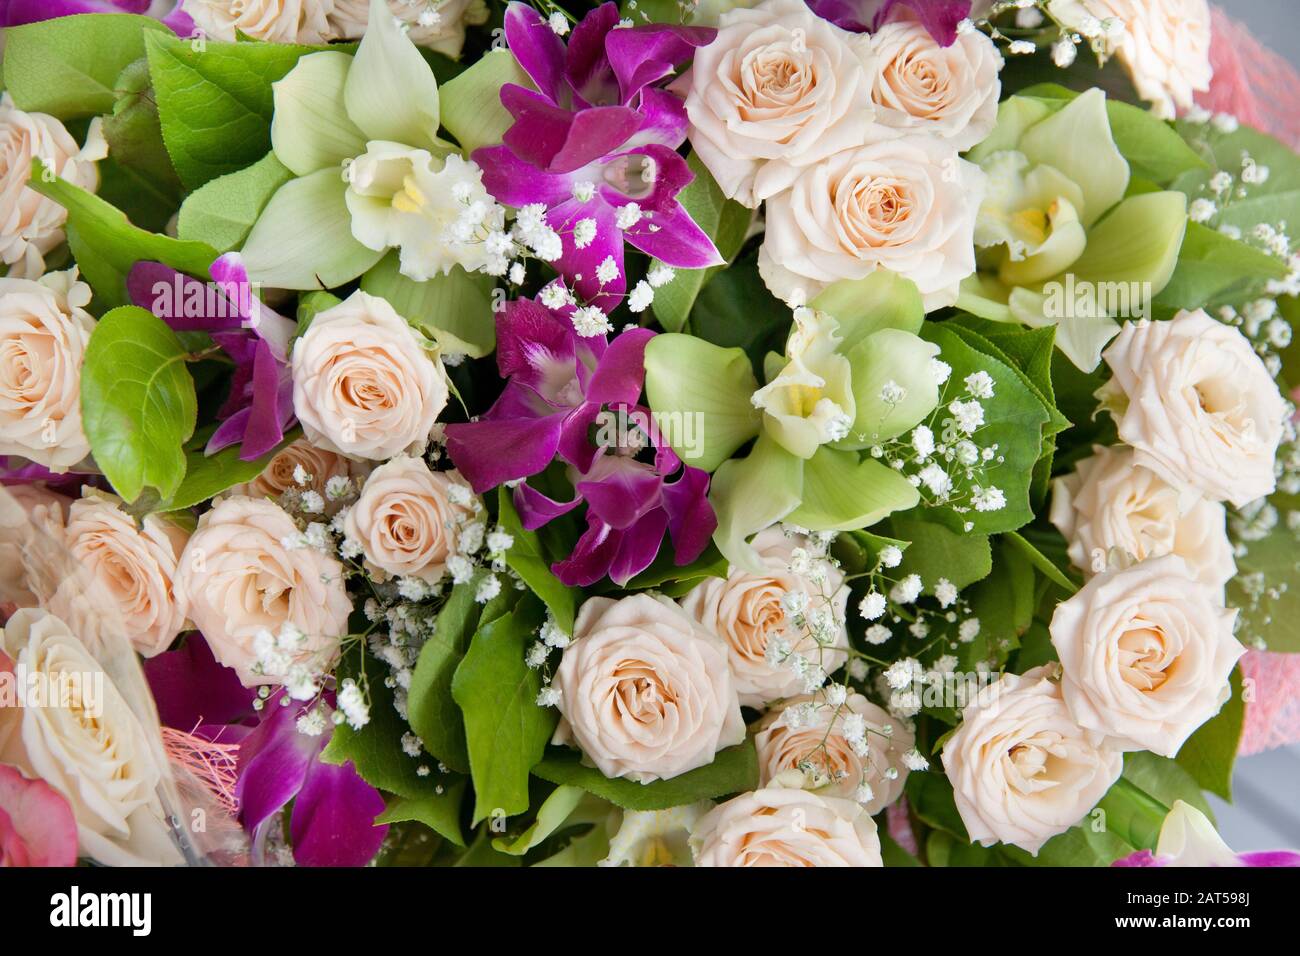 Bright composition of flowers. Bouquet of roses and orchids. Beautiful bouquet, floral background. Stock Photo